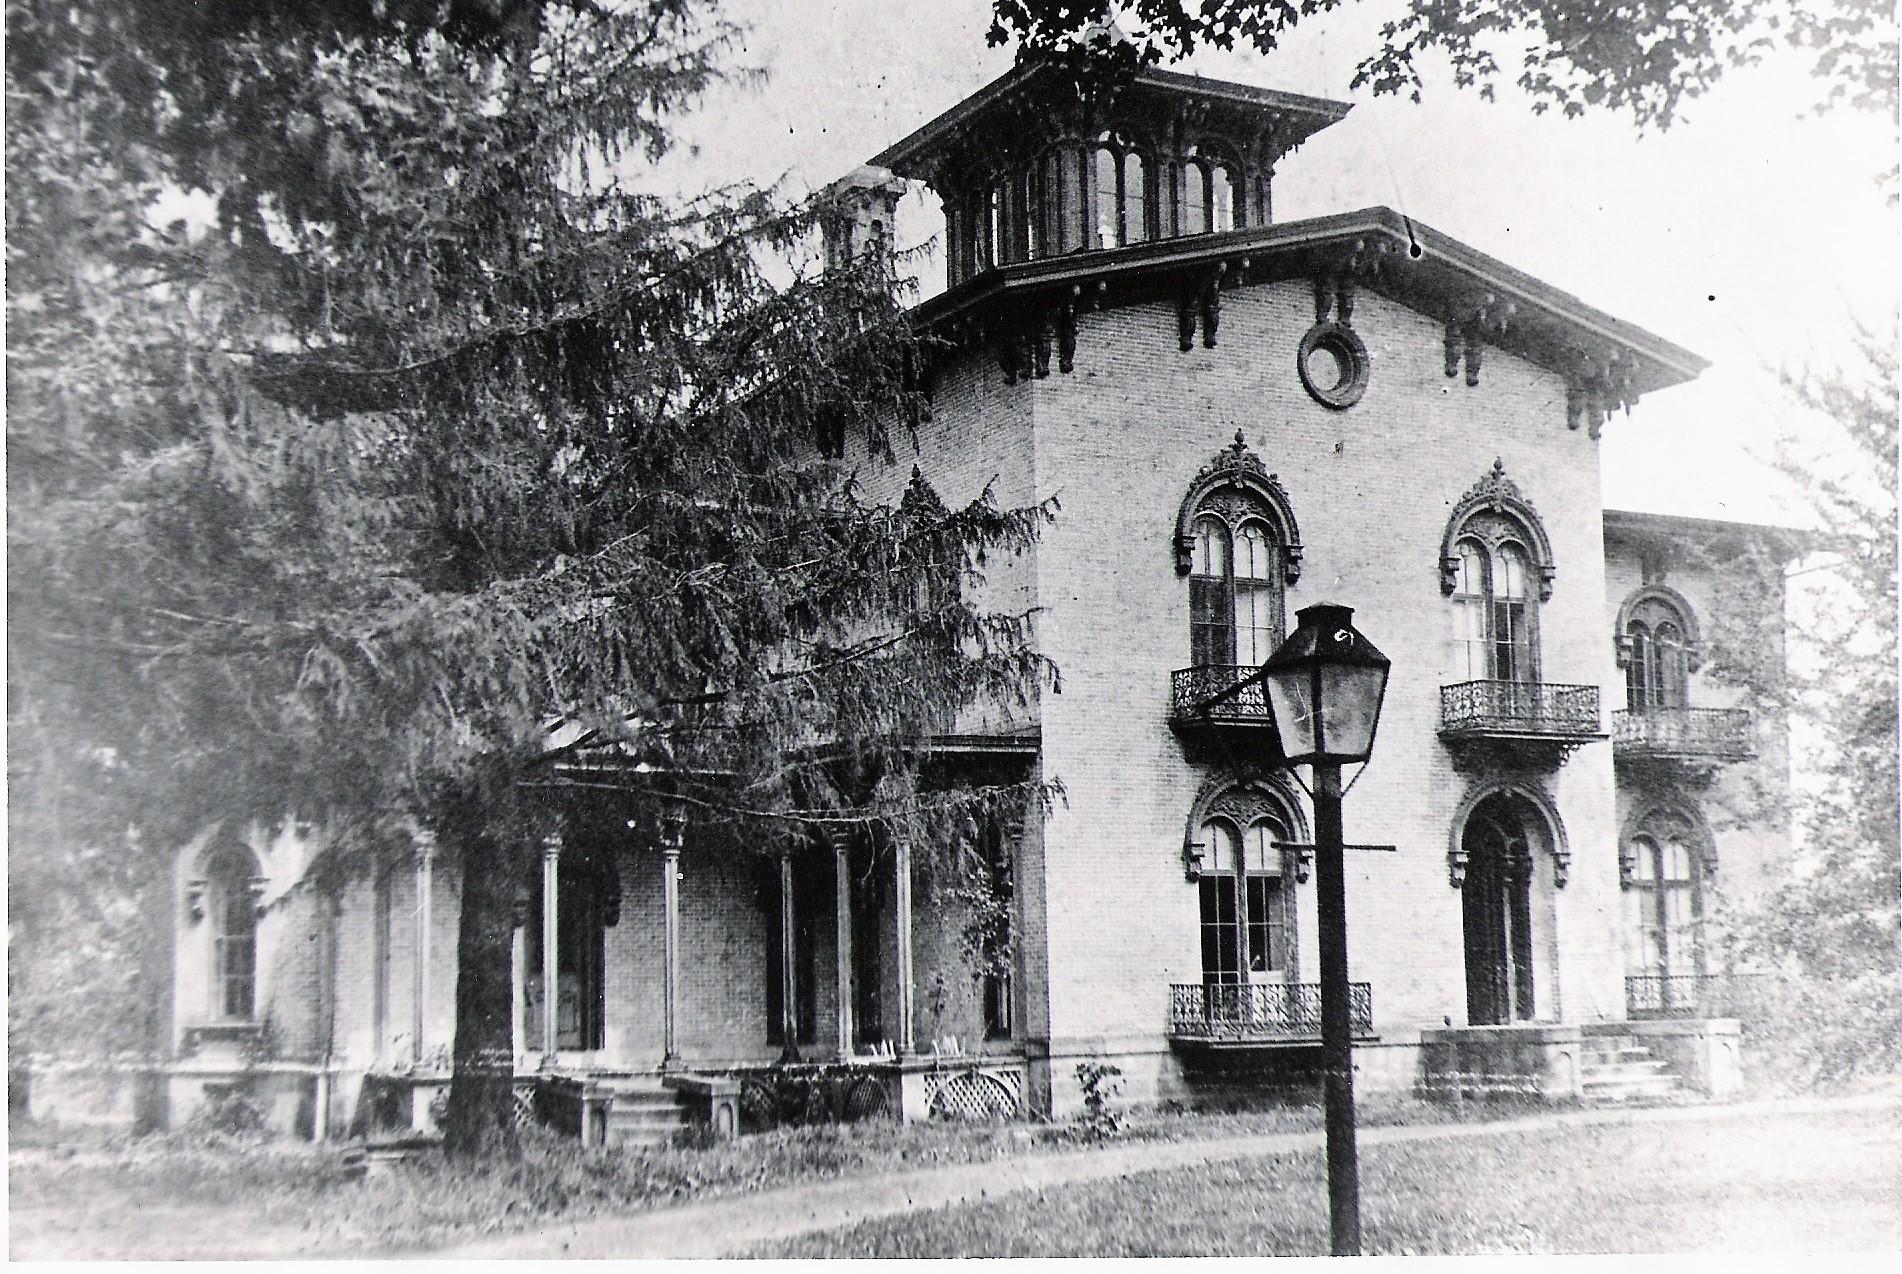 Knowlton Mansion, aka Holt House, circa 1898, that was located on the north side of East Main Street between Pearl and Holt streets, where Top’s is currently (2018) located. This home, built in 1855, has been identified as a station on the Underground Railroad in Westfield. Photo courtesy Patterson Library Archives